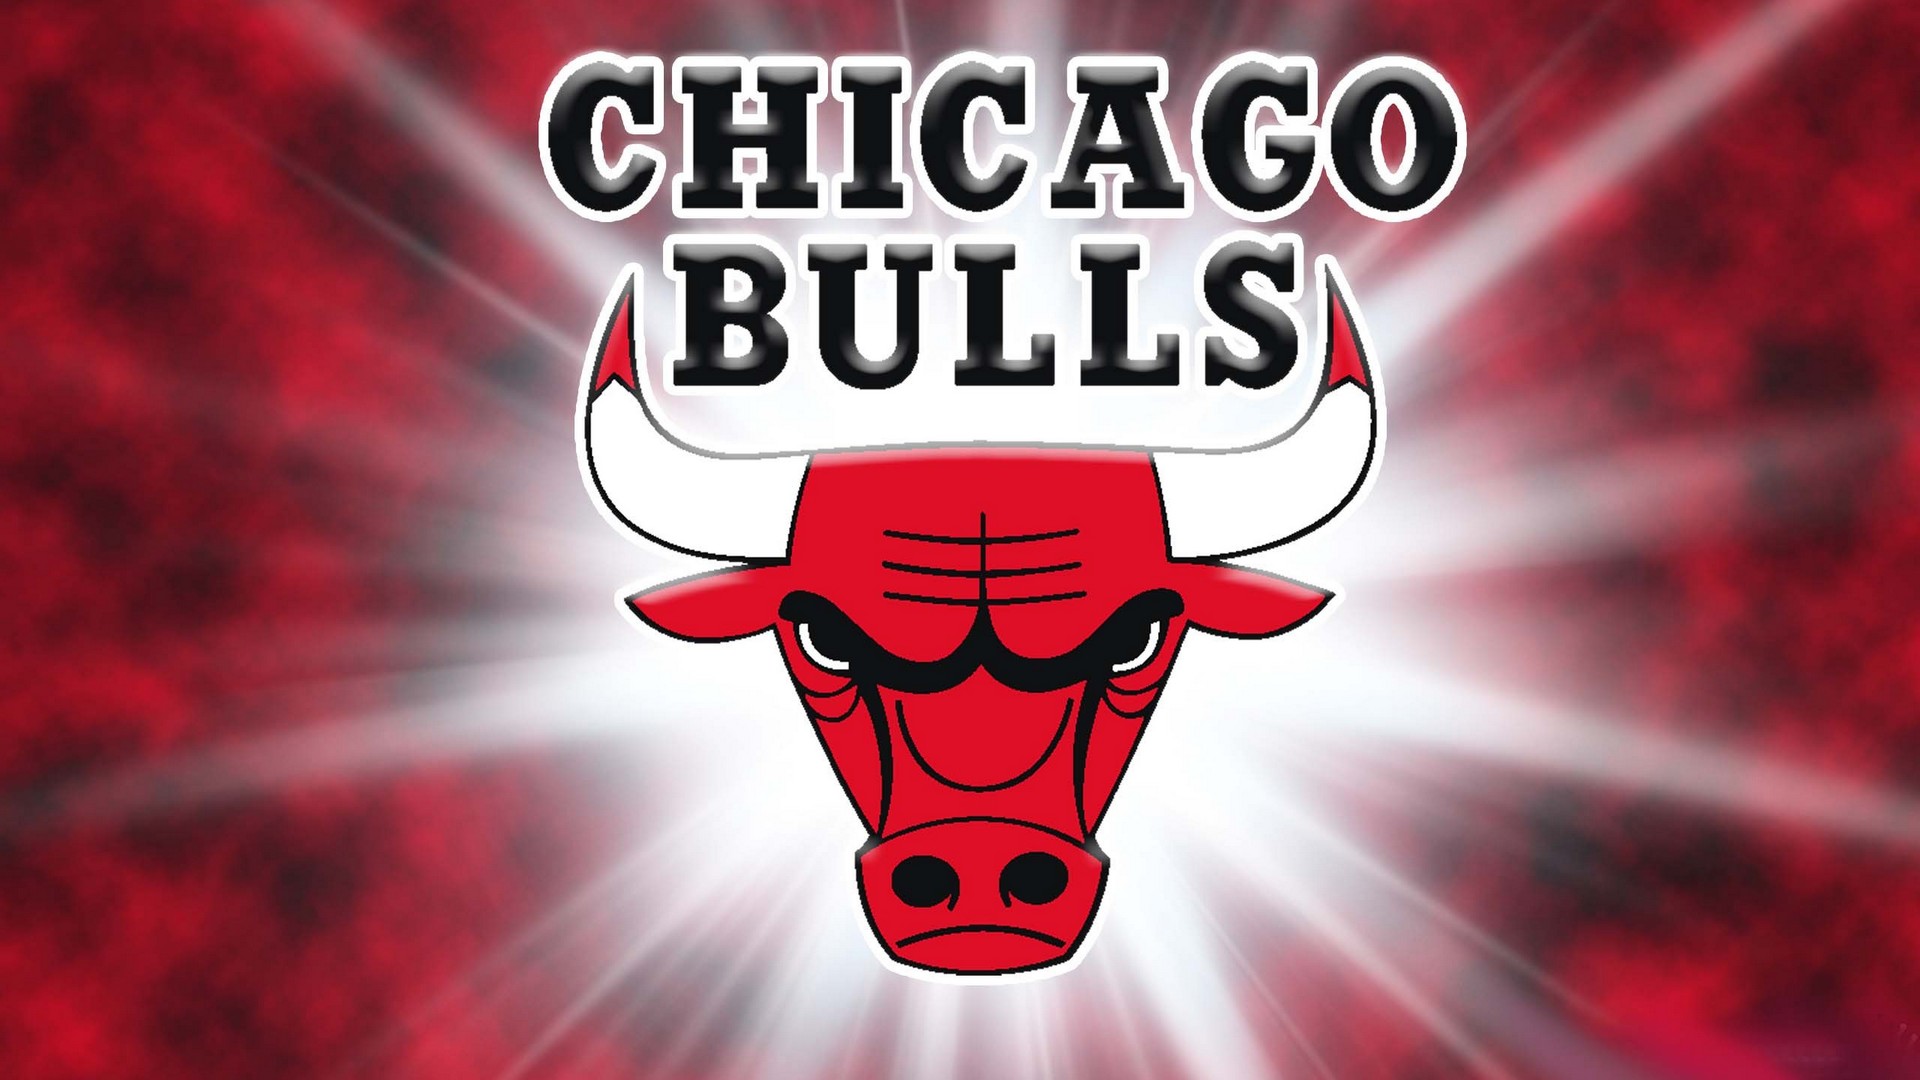 Wallpapers HD Chicago Bulls with high-resolution 1920x1080 pixel. You can use this wallpaper for your Desktop Computer Backgrounds, Windows or Mac Screensavers, iPhone Lock screen, Tablet or Android and another Mobile Phone device